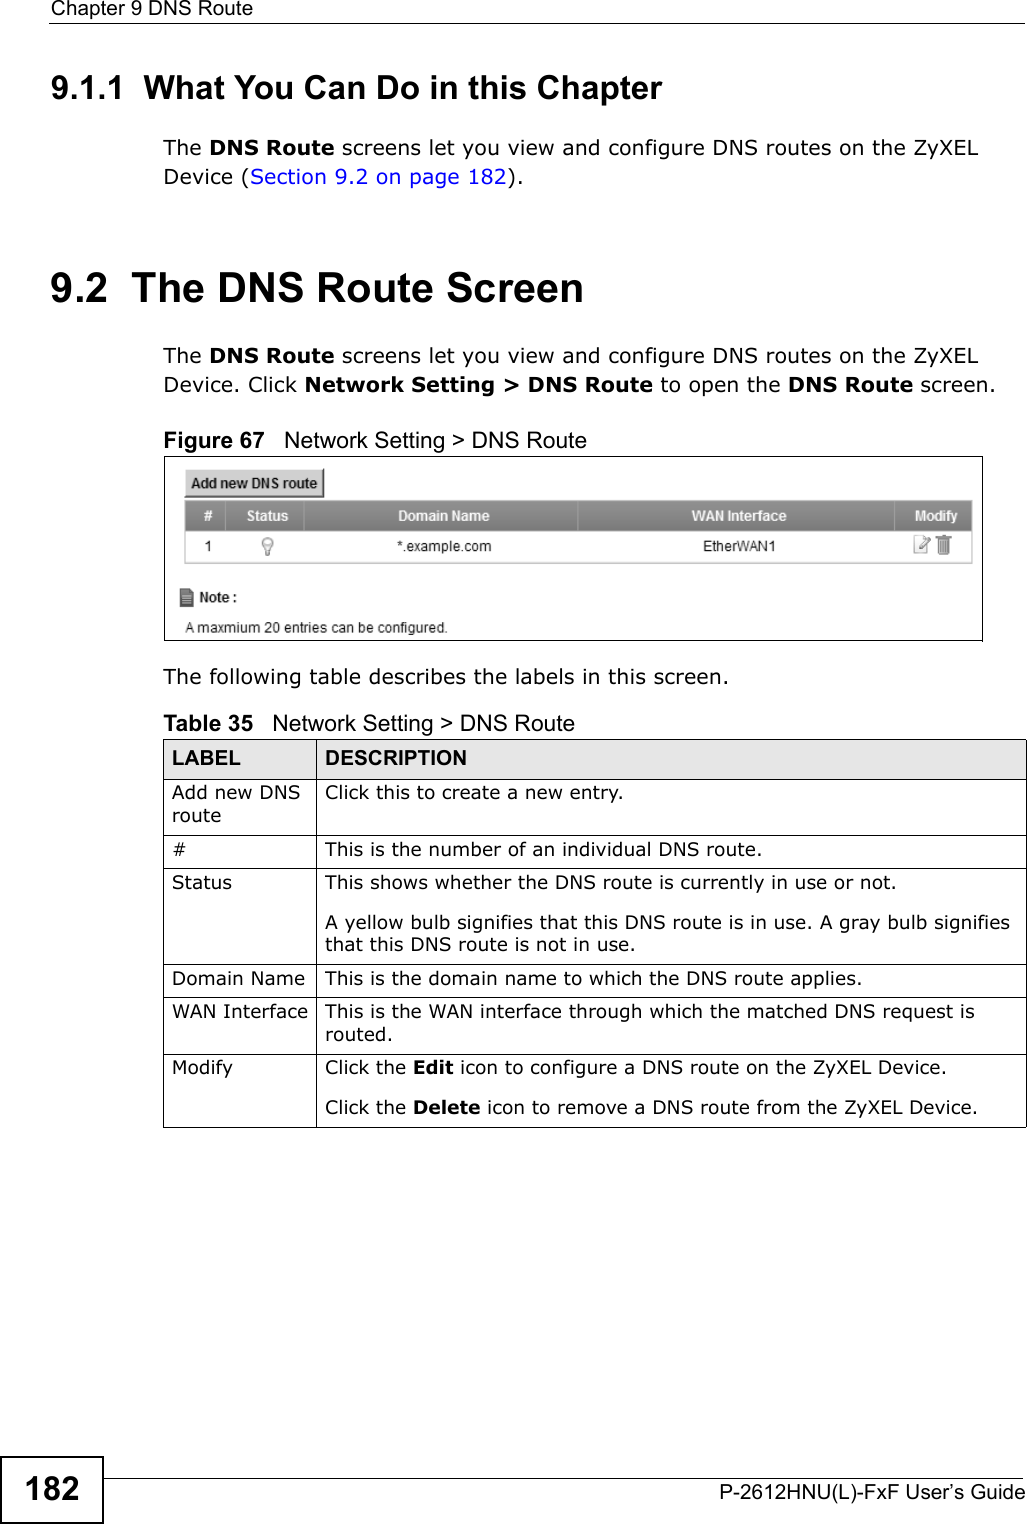 Chapter 9 DNS RouteP-2612HNU(L)-FxF User’s Guide1829.1.1  What You Can Do in this ChapterThe DNS Route screens let you view and configure DNS routes on the ZyXEL Device (Section 9.2 on page 182).9.2  The DNS Route ScreenThe DNS Route screens let you view and configure DNS routes on the ZyXEL Device. Click Network Setting &gt; DNS Route to open the DNS Route screen.Figure 67   Network Setting &gt; DNS RouteThe following table describes the labels in this screen. Table 35   Network Setting &gt; DNS RouteLABEL DESCRIPTIONAdd new DNSrouteClick this to create a new entry.# This is the number of an individual DNS route.Status This shows whether the DNS route is currently in use or not.A yellow bulb signifies that this DNS route is in use. A gray bulb signifiesthat this DNS route is not in use.Domain Name This is the domain name to which the DNS route applies. WAN Interface This is the WAN interface through which the matched DNS request is routed. Modify Click the Edit icon to configure a DNS route on the ZyXEL Device.Click the Delete icon to remove a DNS route from the ZyXEL Device. 